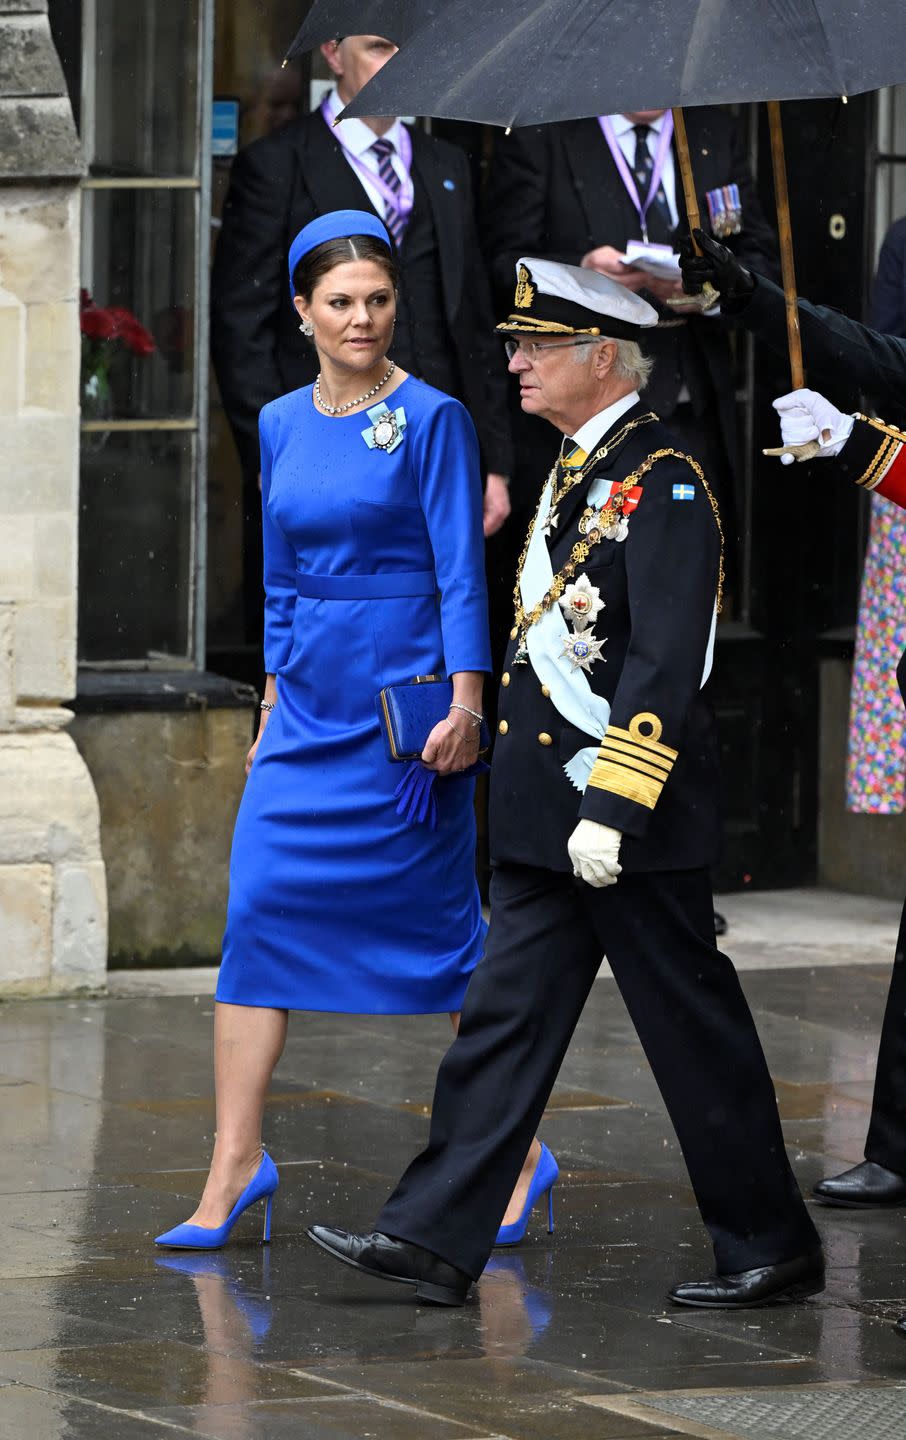 swedens king carl xvi gustaf and crown princess victoria arrive at westminster abbey in central london on may 6, 2023, ahead of the coronations of britains king charles iii and britains camilla, queen consort the set piece coronation is the first in britain in 70 years, and only the second in history to be televised charles will be the 40th reigning monarch to be crowned at the central london church since king william i in 1066 outside the uk, he is also king of 14 other commonwealth countries, including australia, canada and new zealand camilla, his second wife, will be crowned queen alongside him, and be known as queen camilla after the ceremony photo by toby melville pool afp photo by toby melvillepoolafp via getty images